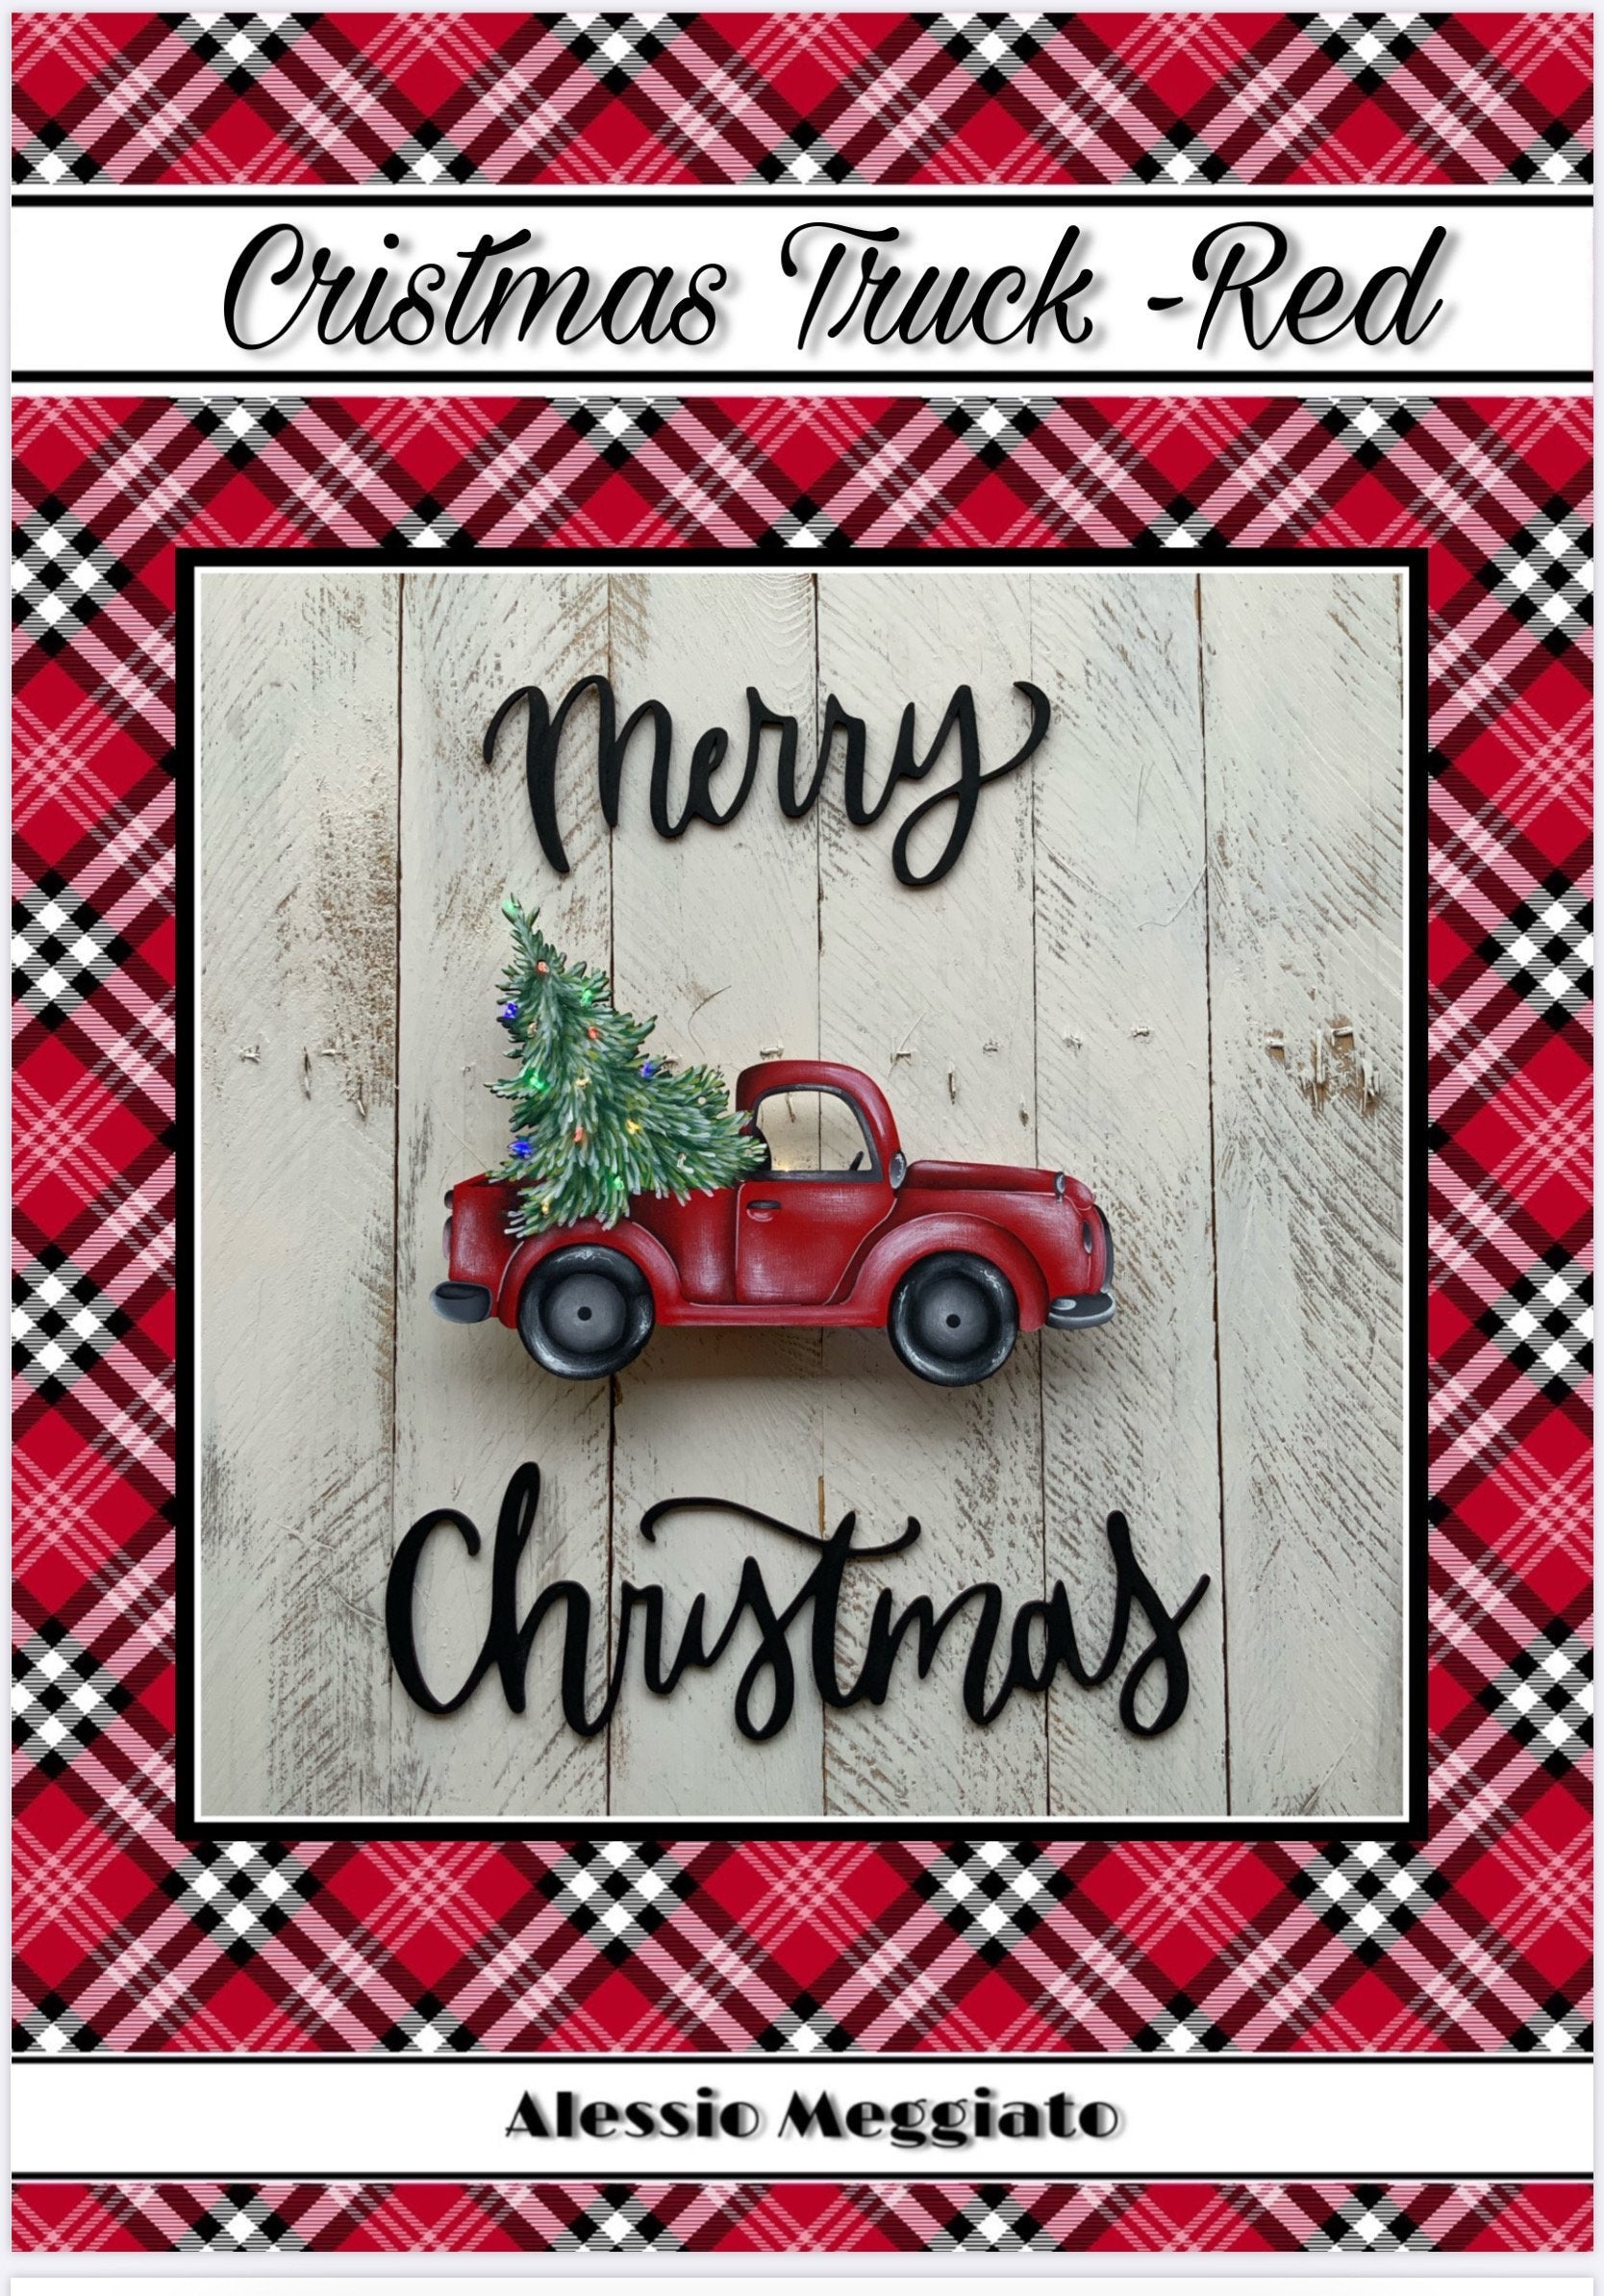 E-pattern Christmas Truck-Red ( italiano) - Out of the Wood